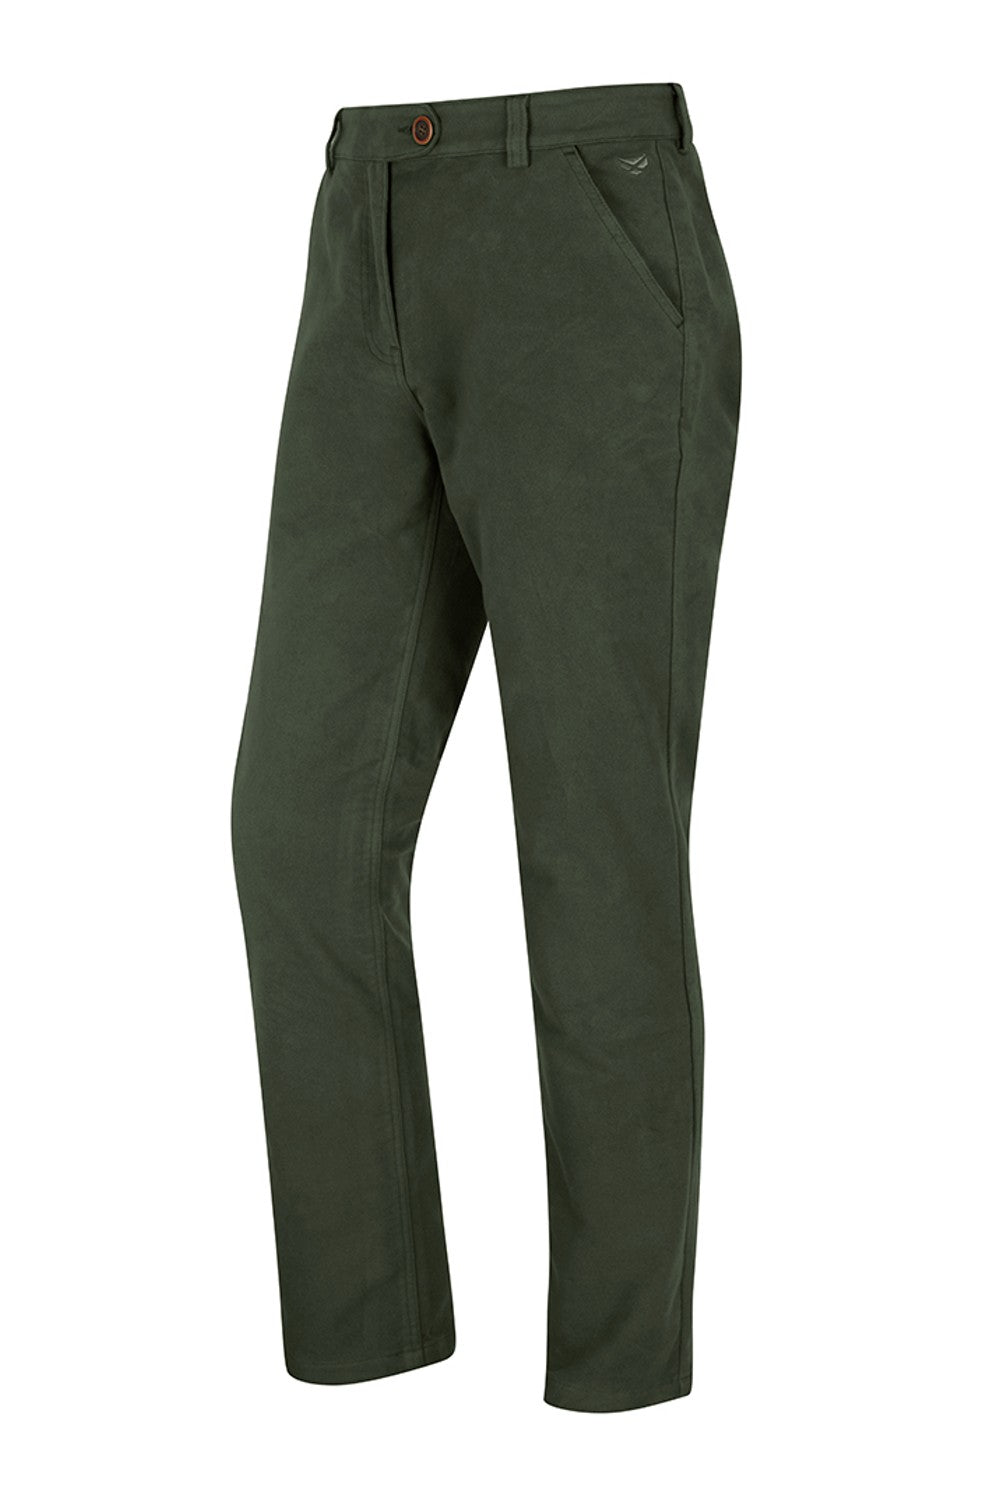 Granite II Utility Thermal Trousers by Hoggs Professional